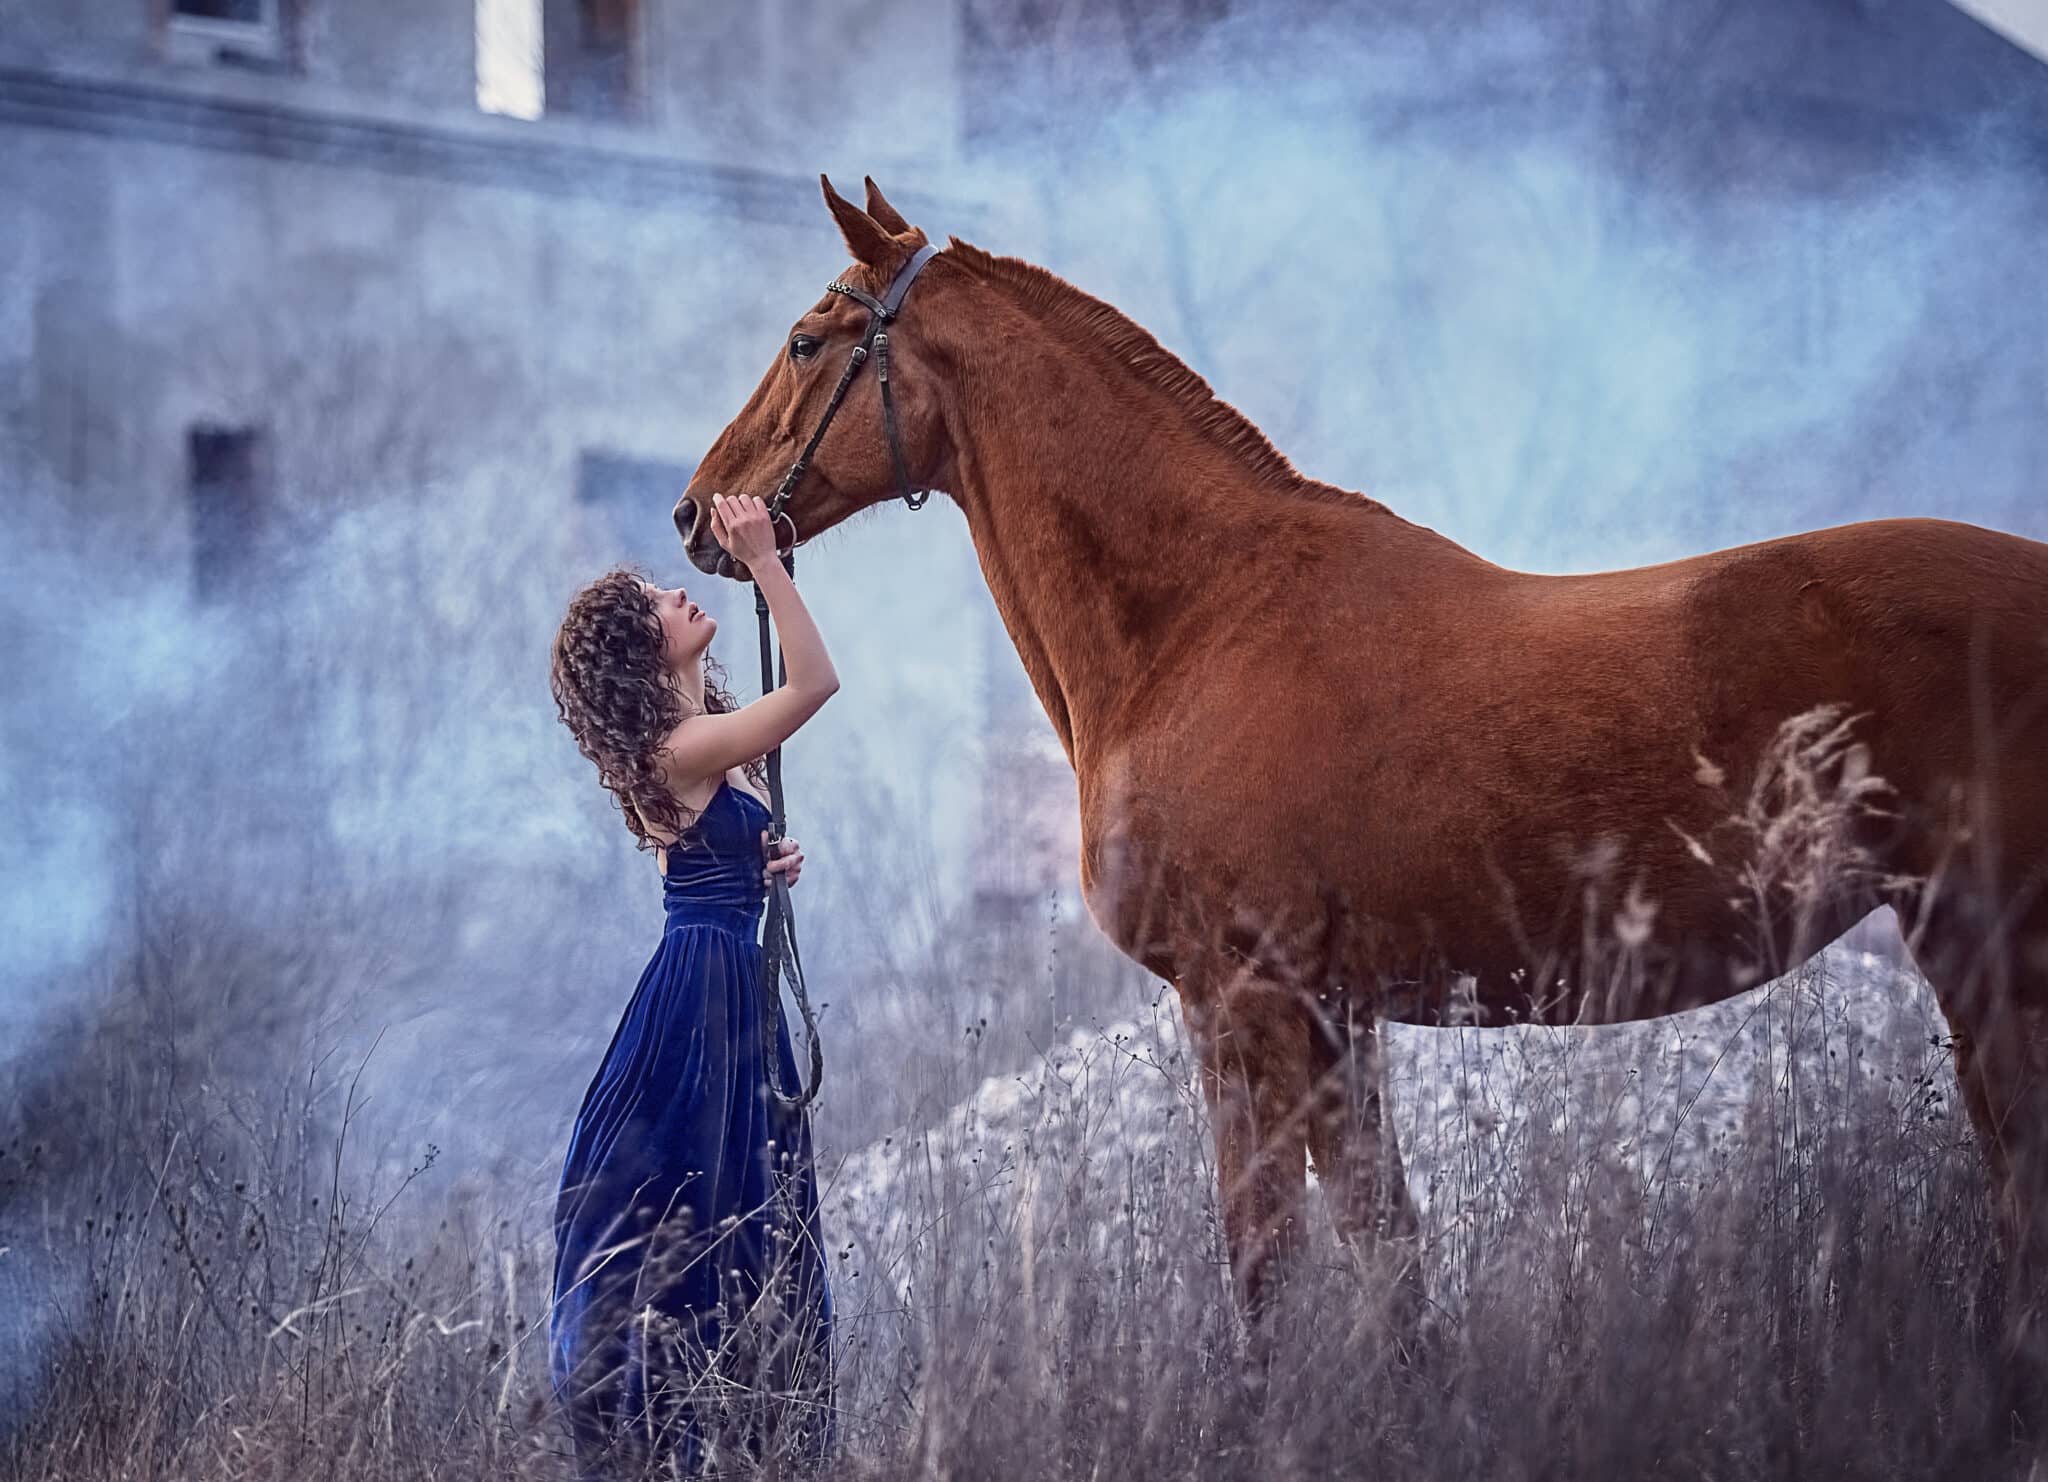 A beautiful curly-haired lady in a blue dress stands next to a red horse